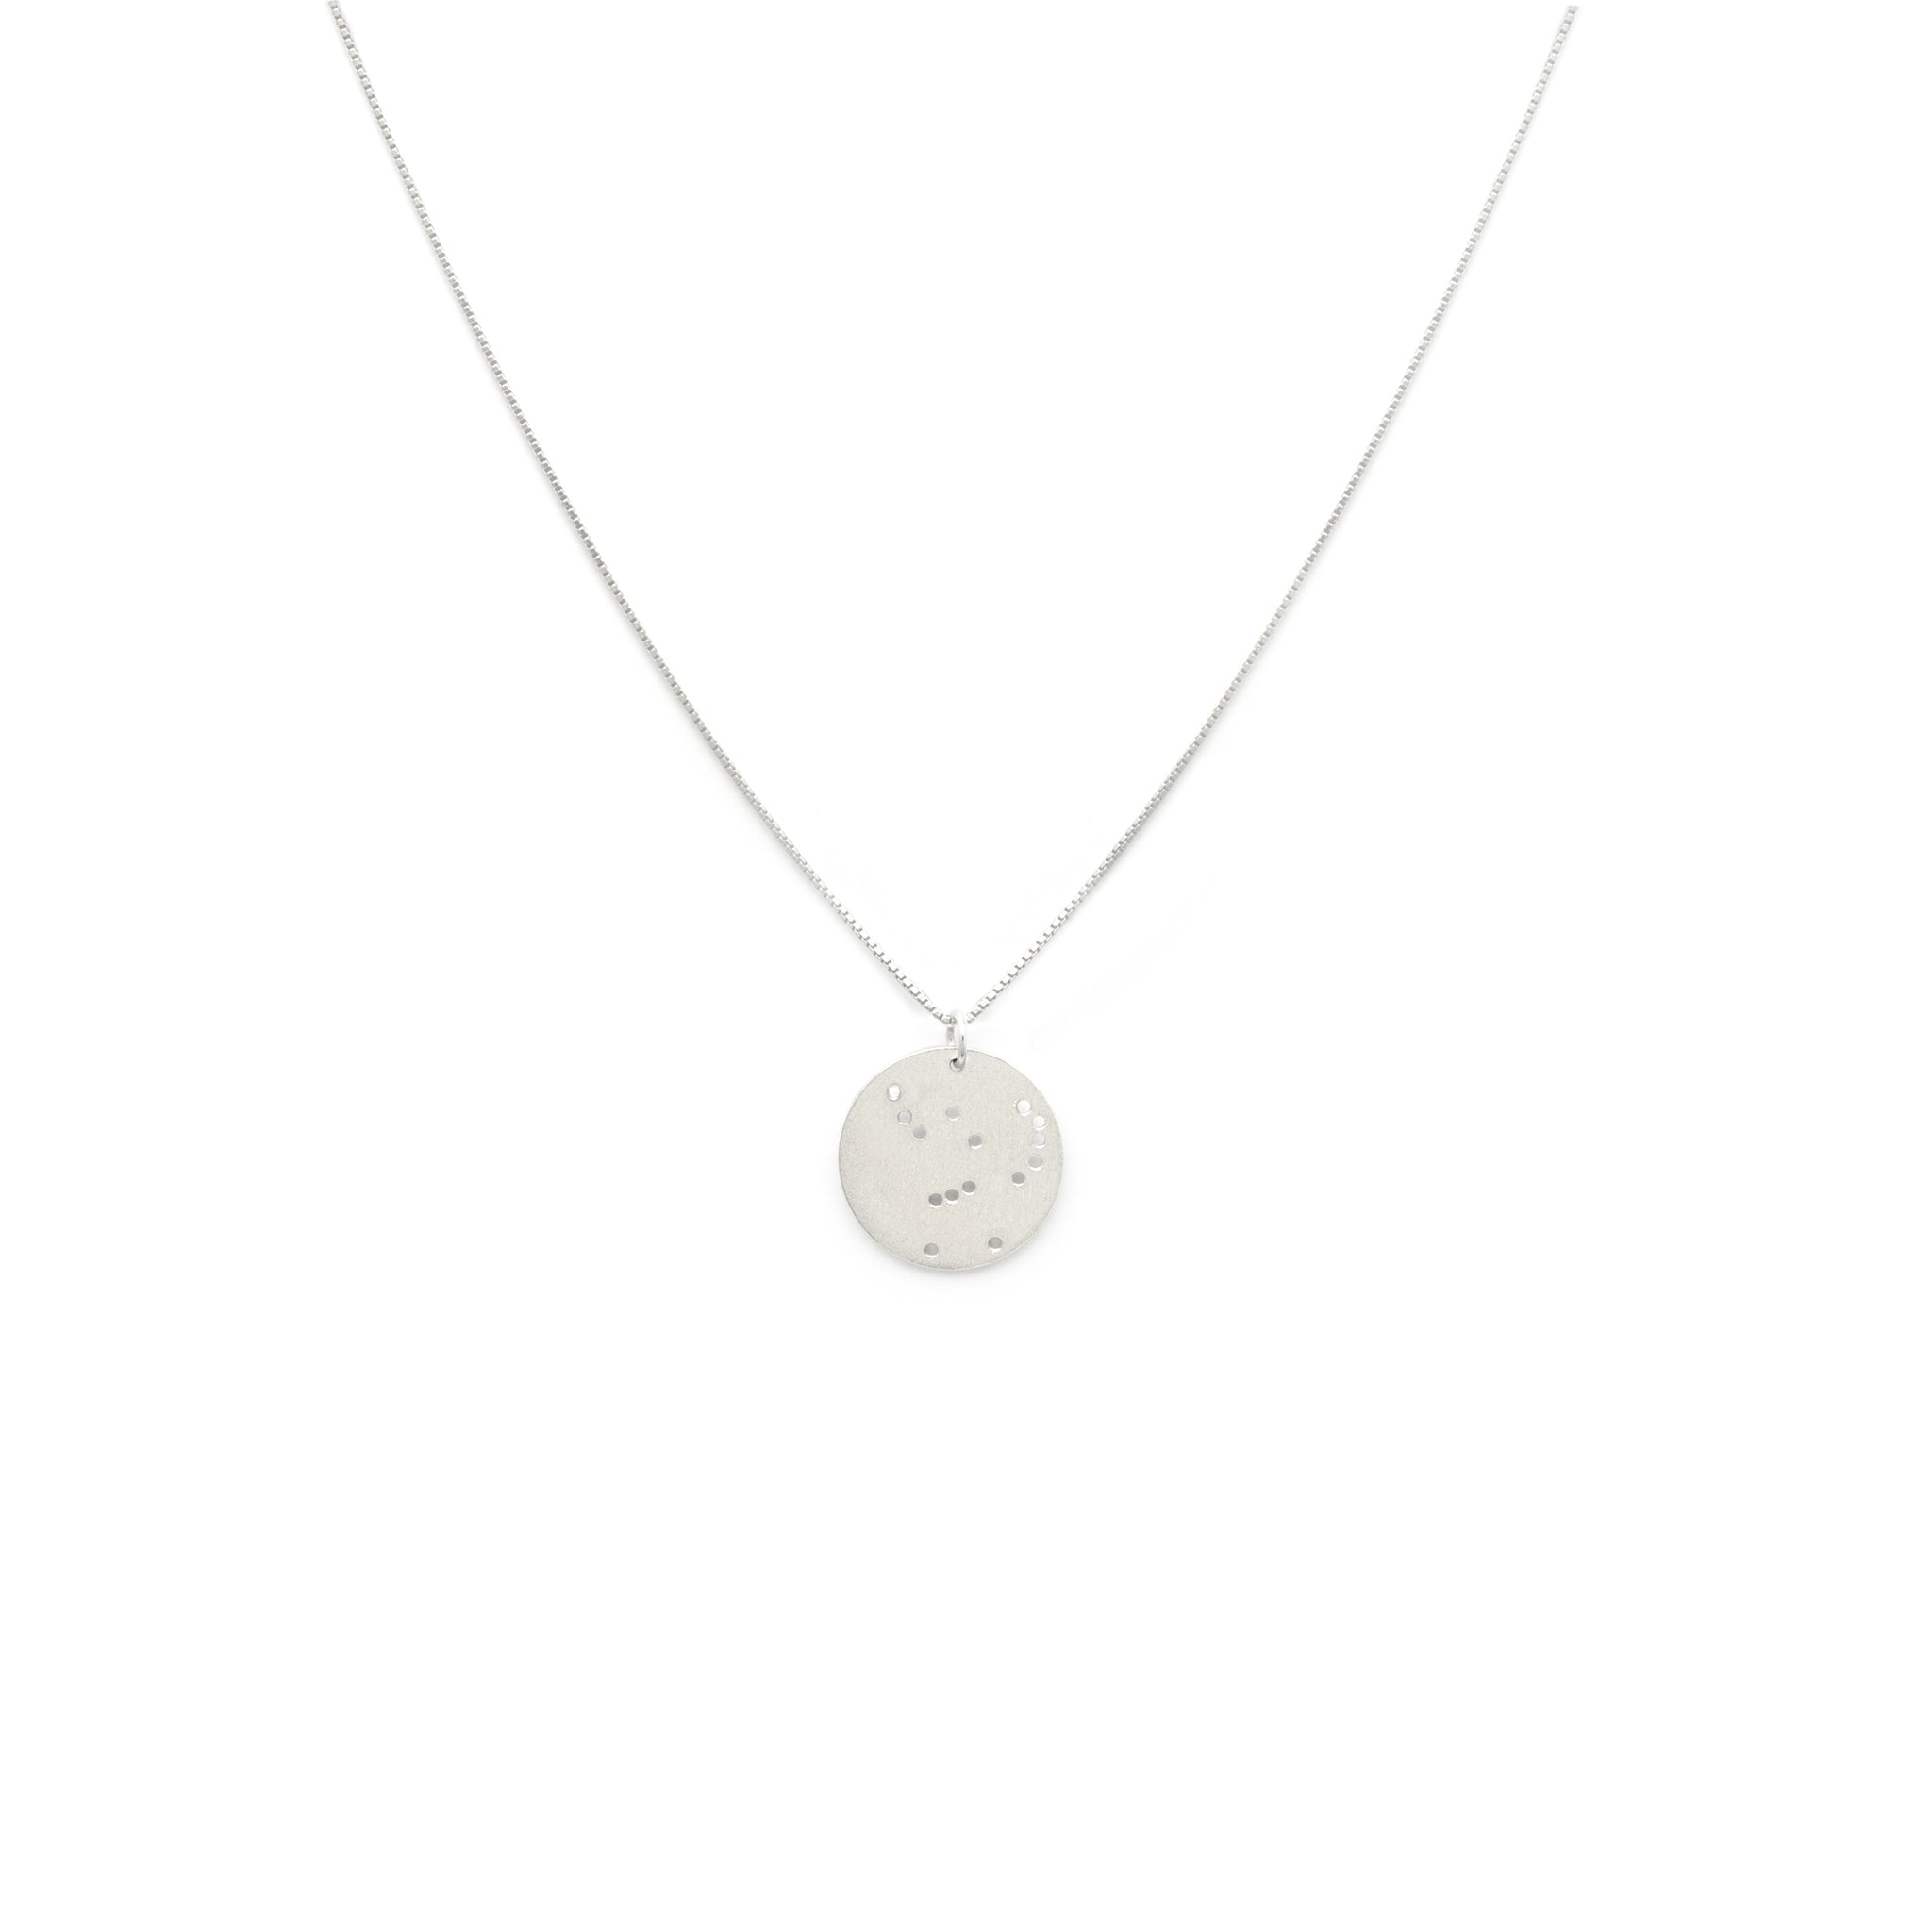 Constellation Necklace - Orion